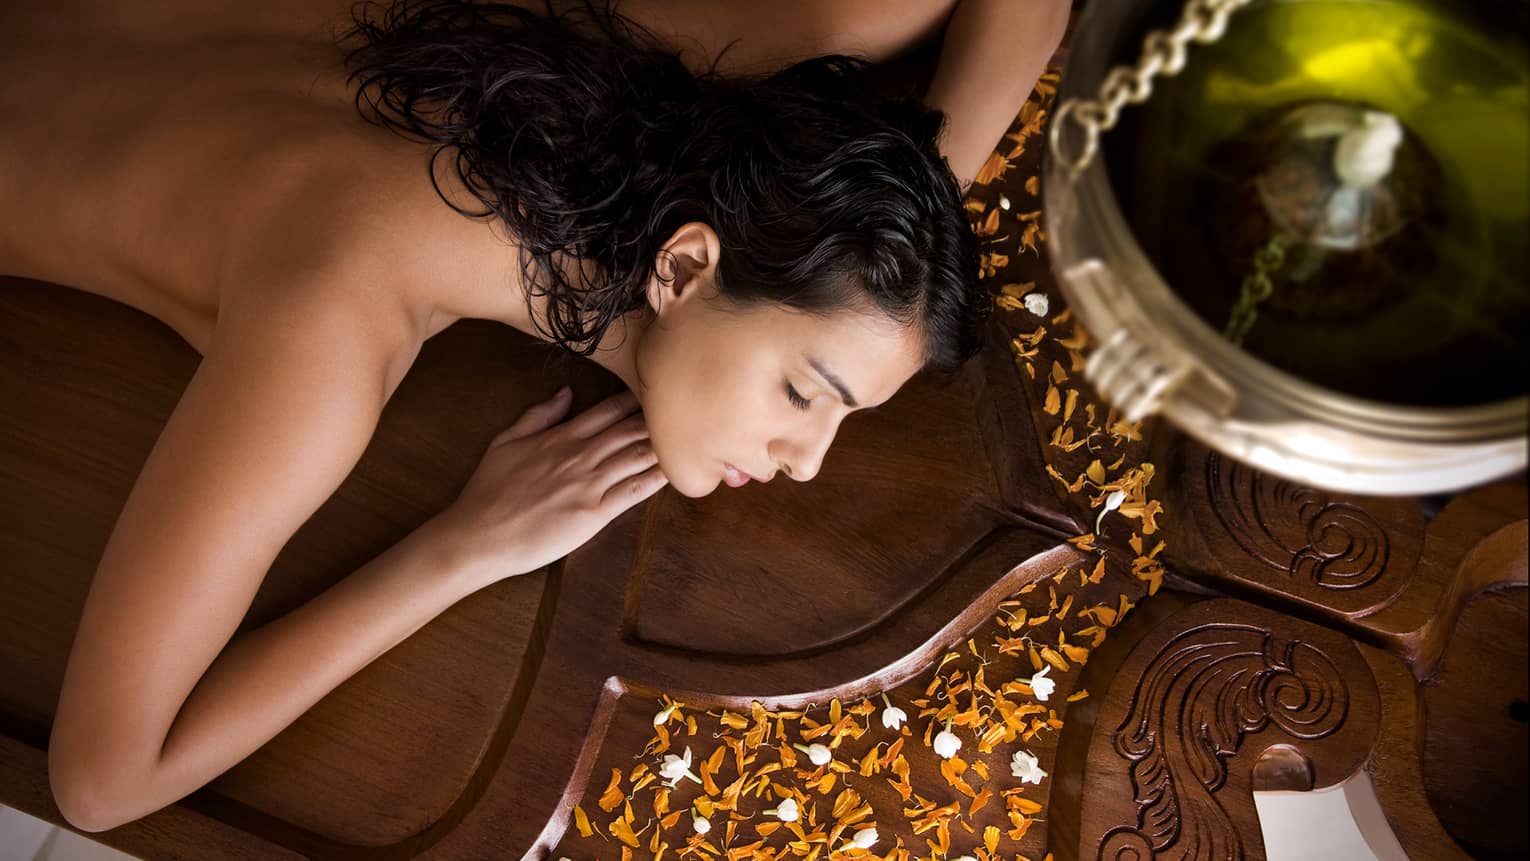 Side view of woman with bare back, shoulders lying on wood Spa table, orange flower petals